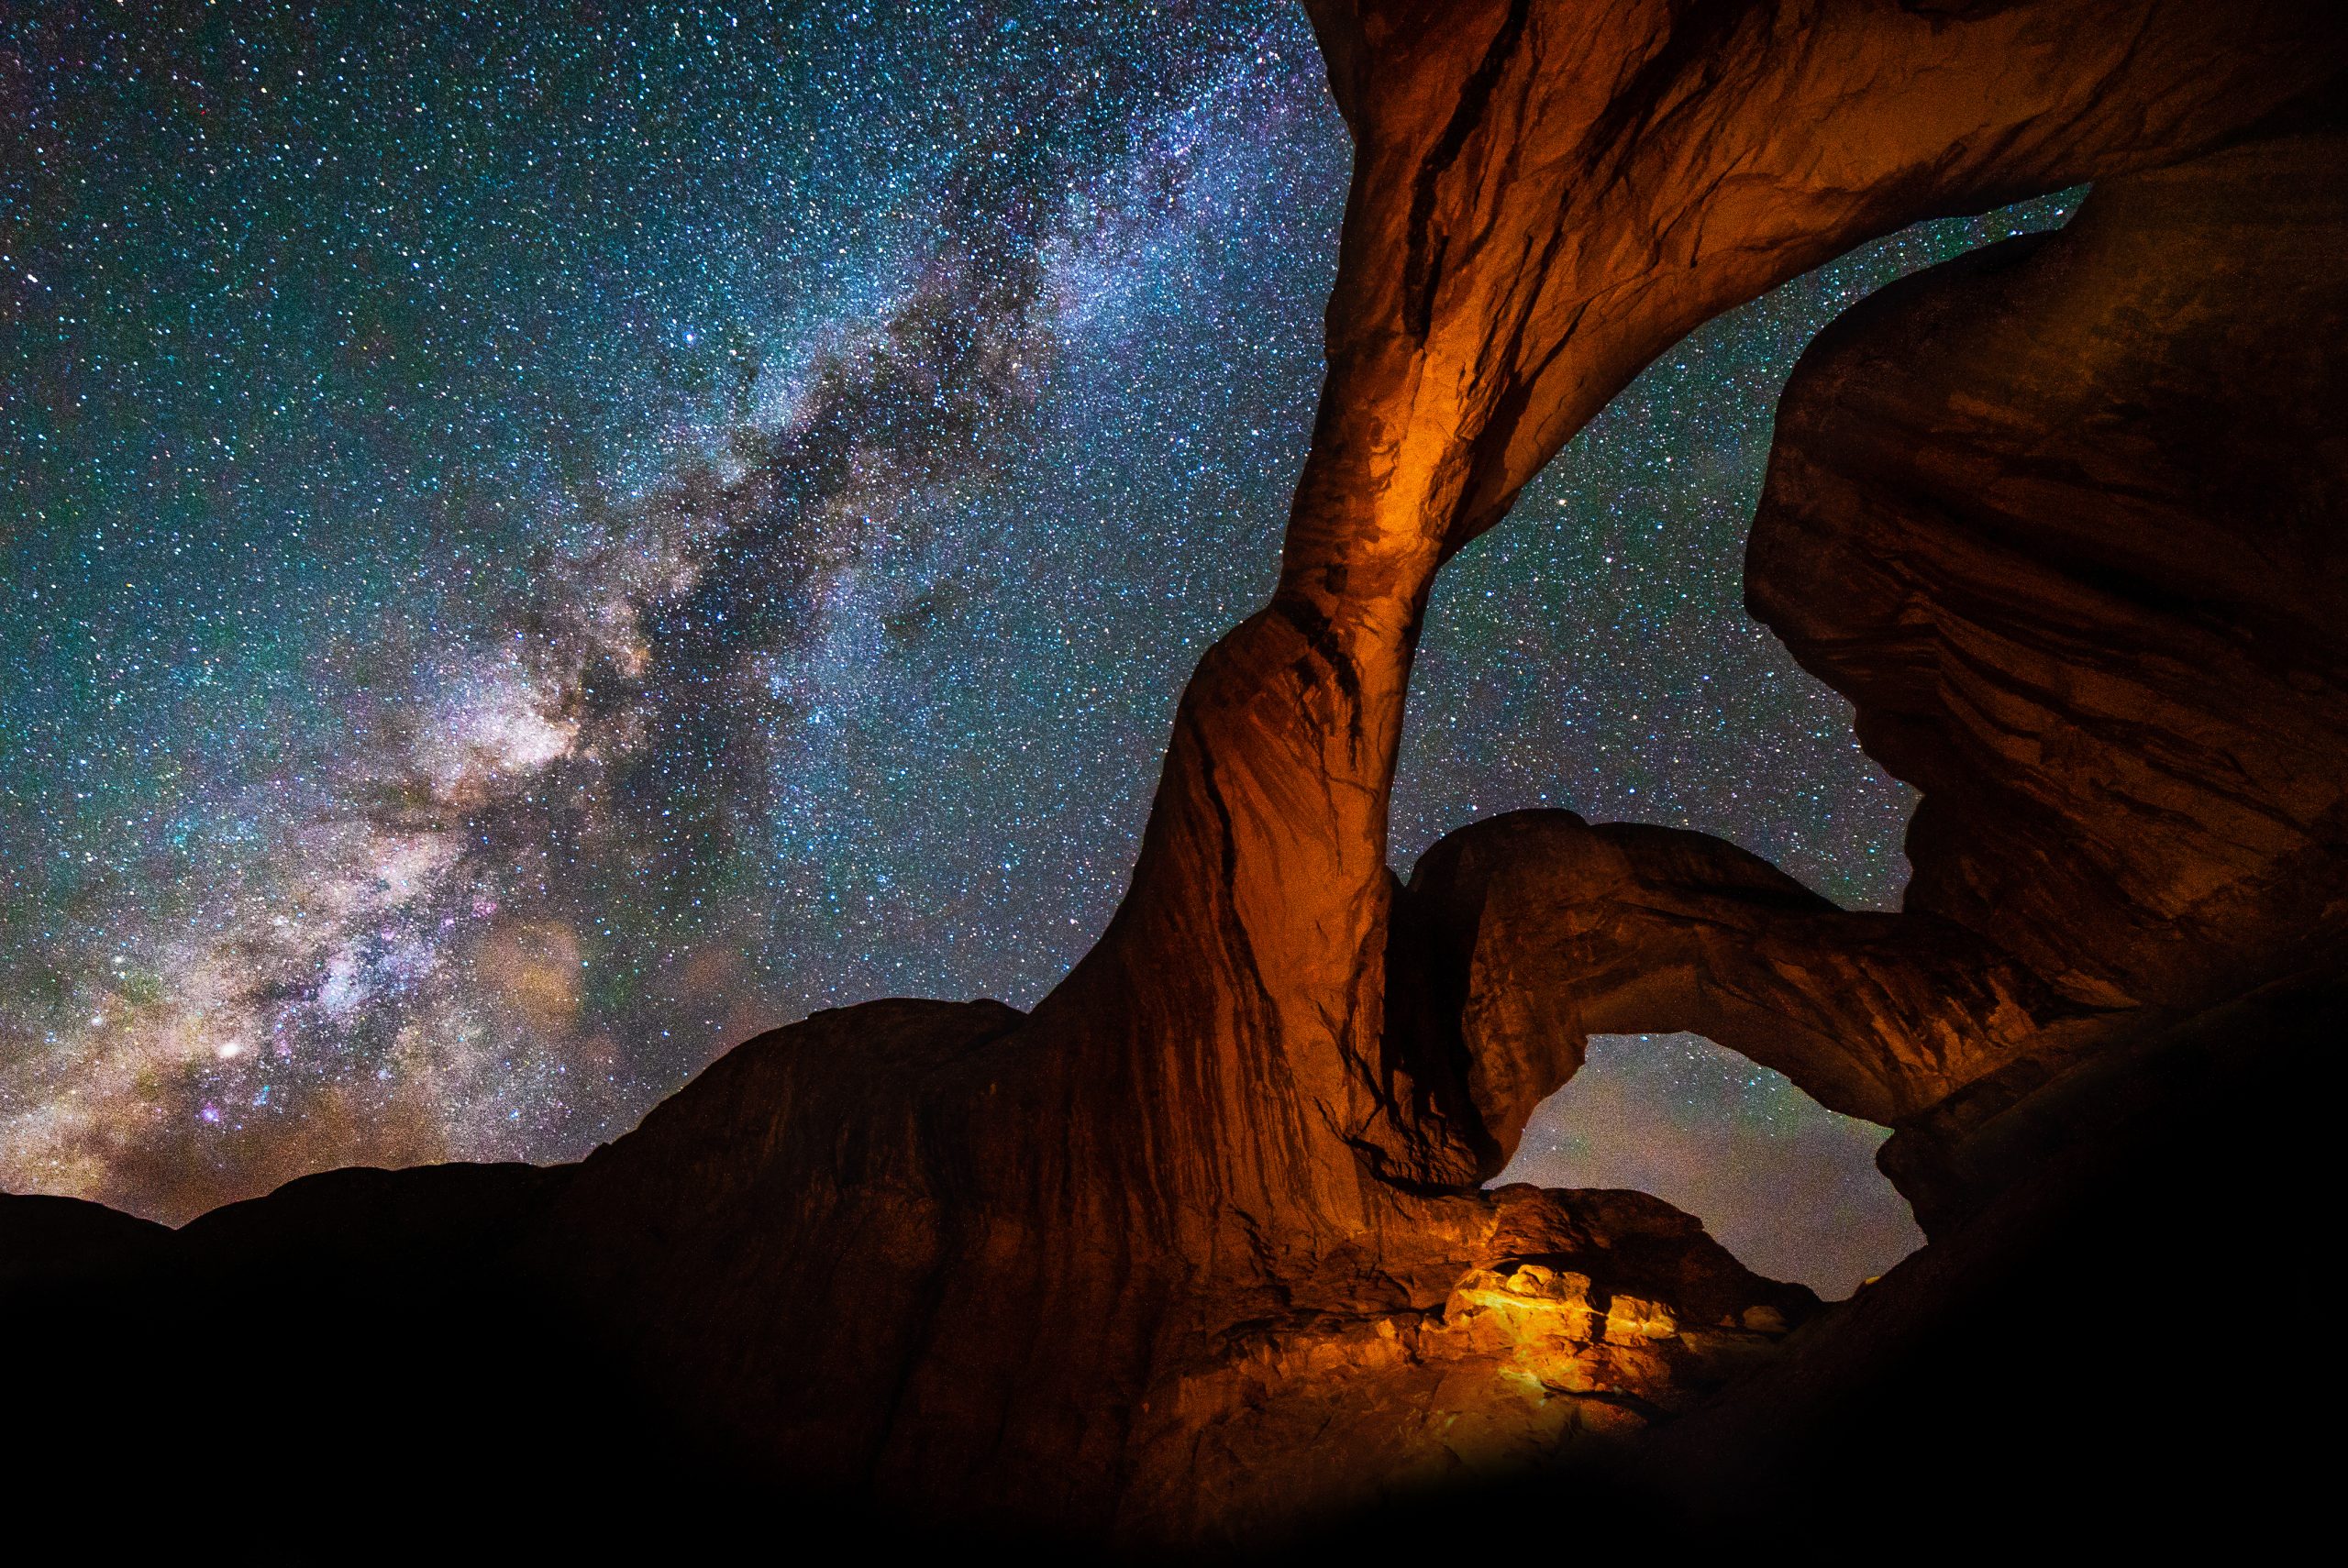 Starry night sky with rock formations